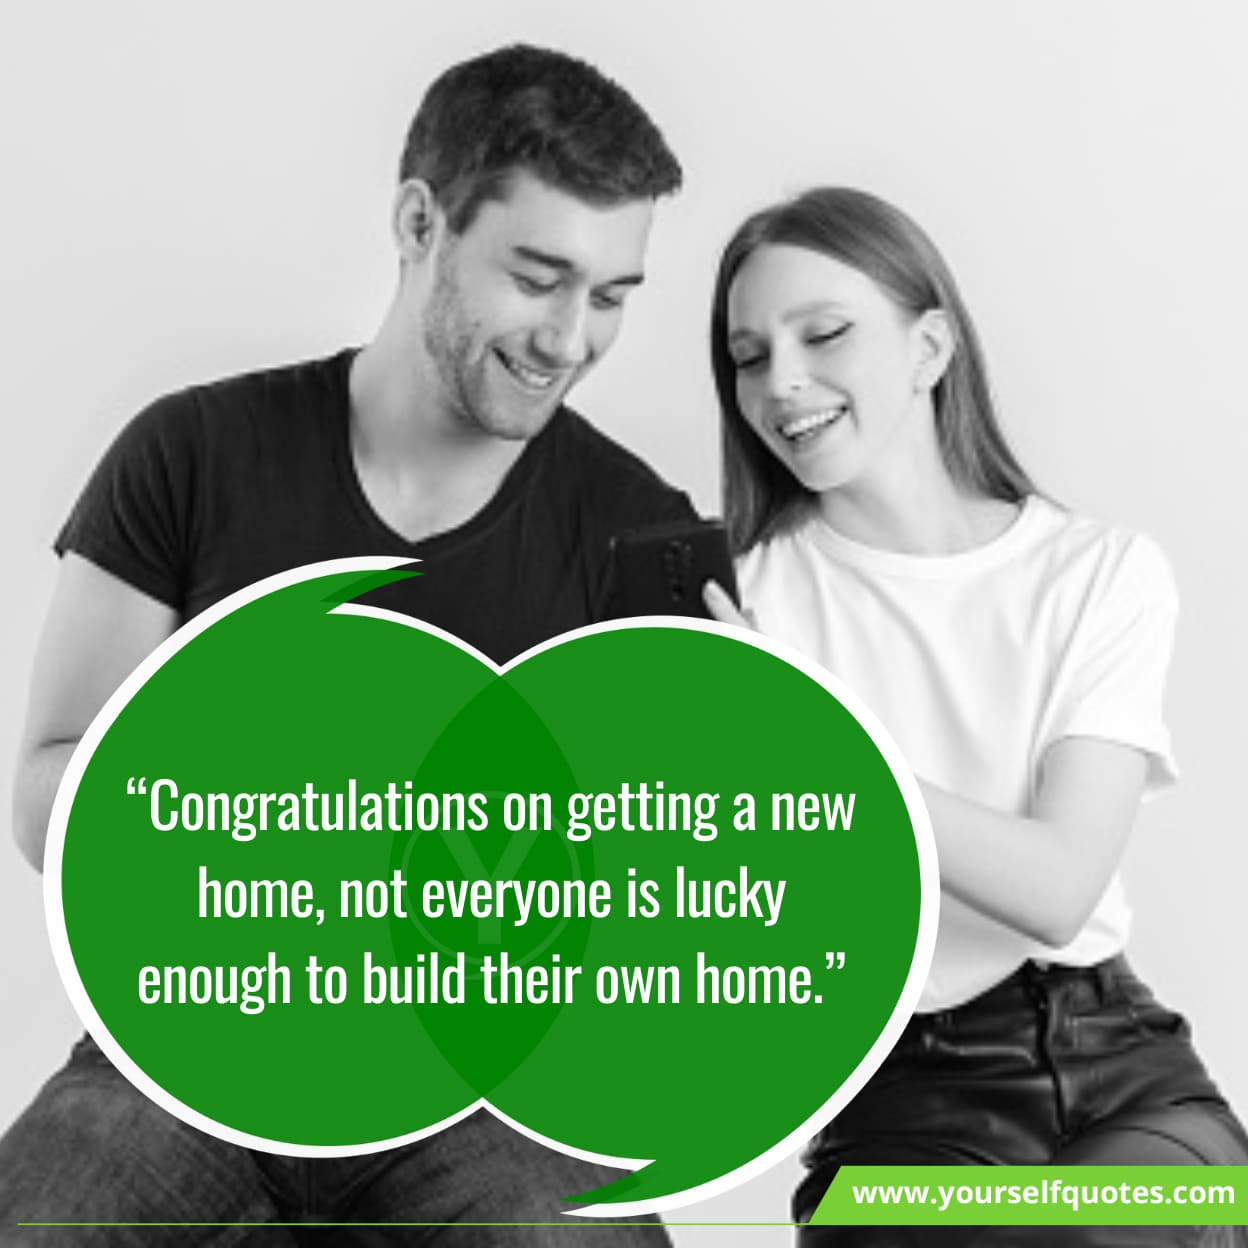 Congratulations Messages For New Home